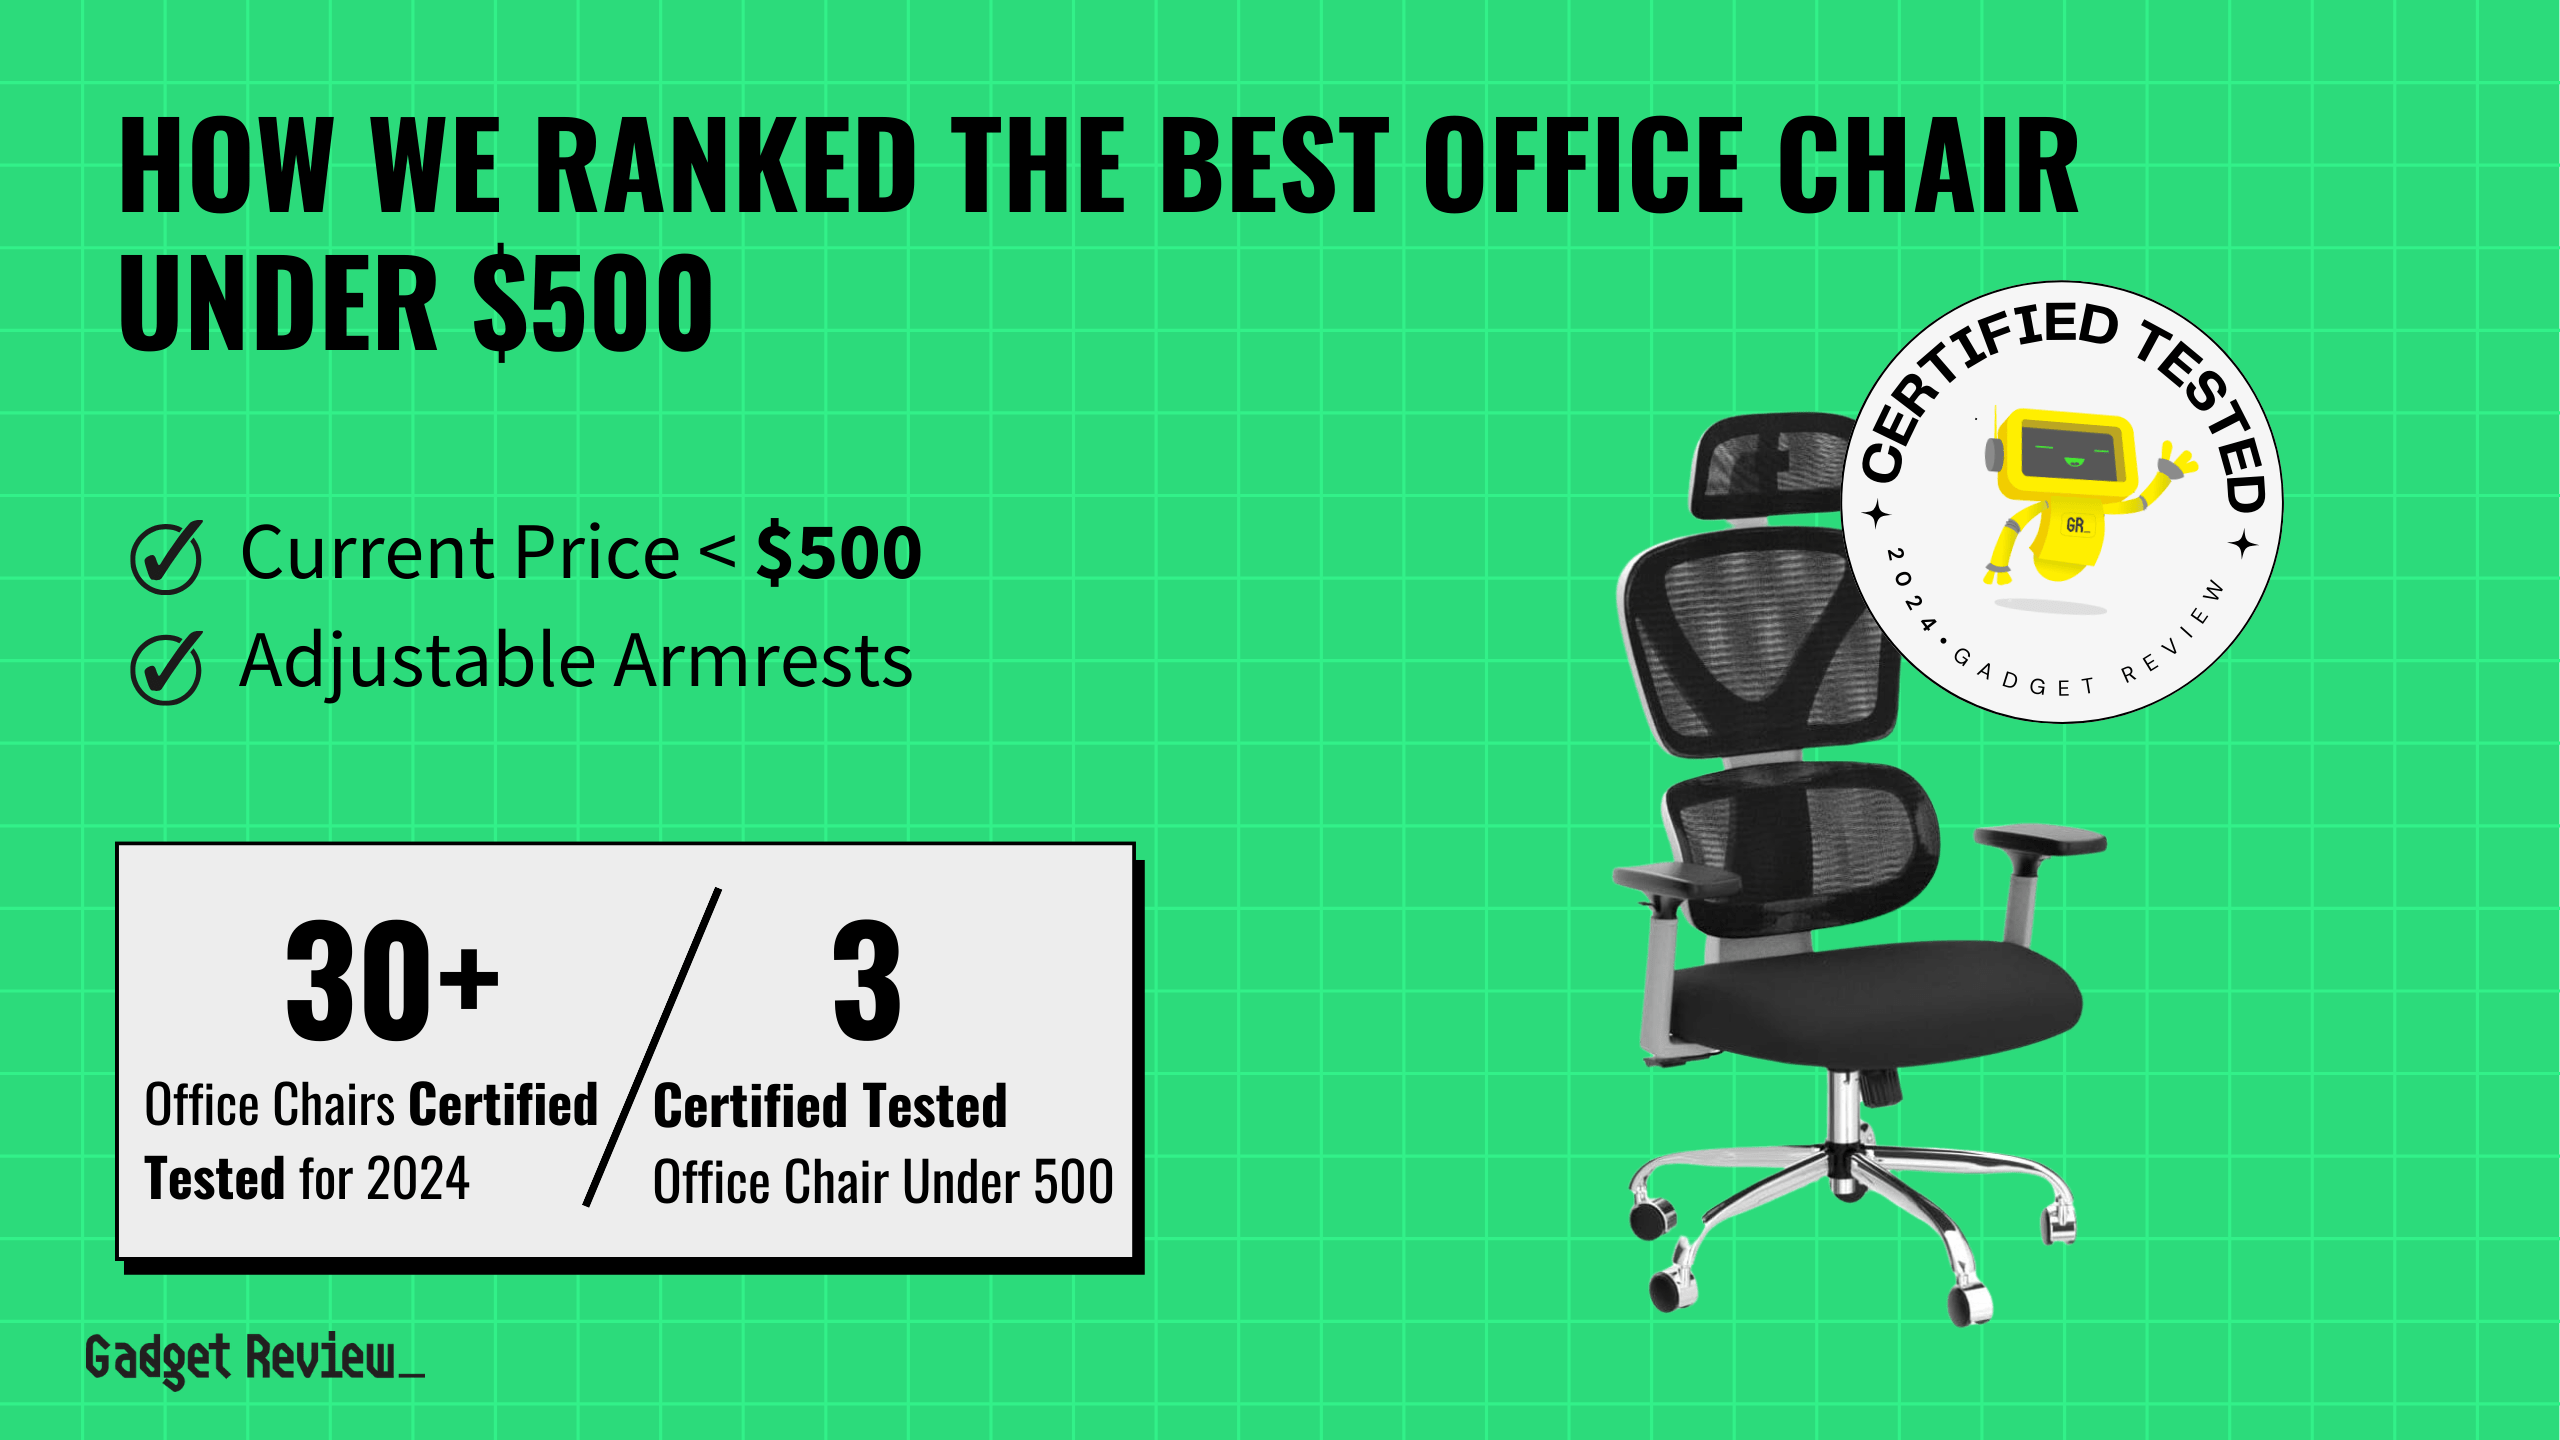 What Are The 3 Top Office Chairs Under $500?